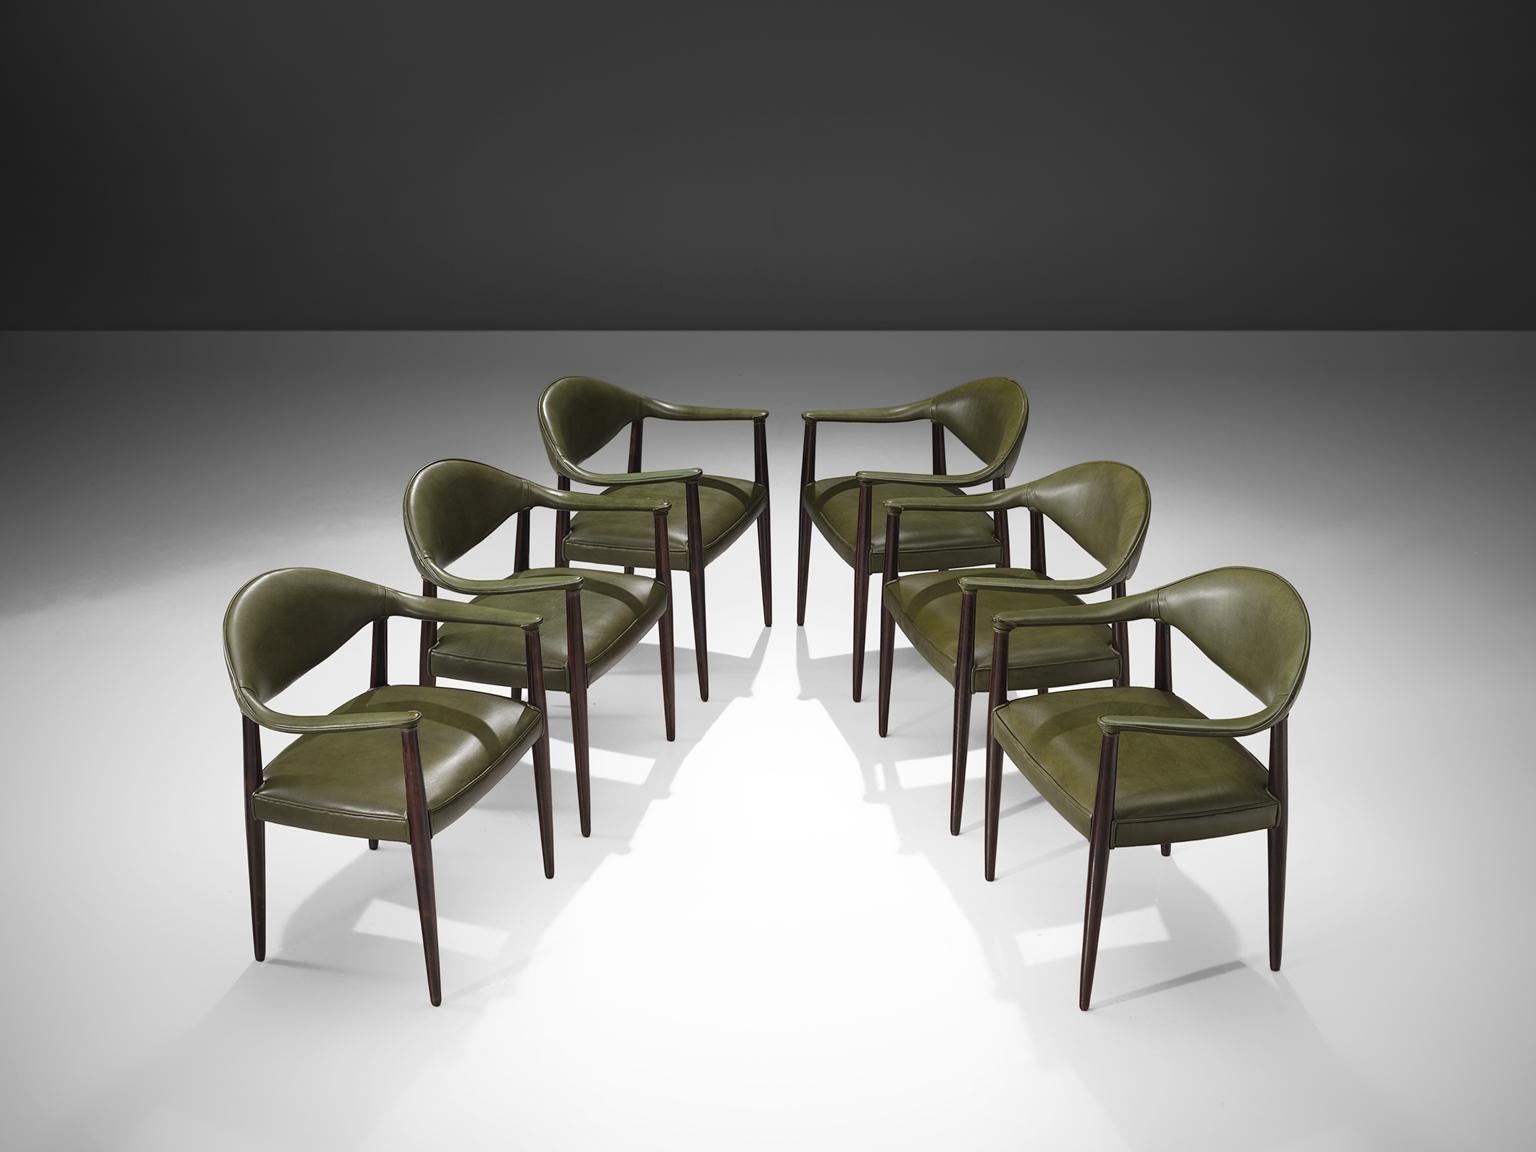 Juan Gamboa, six dining chairs, green leather and mahogany, Spain, 1960s.

This set of six grand armchairs are designed by Jean Gamboa. The olive green luxurious leather is still original and therefore shows signs of age and wear that enrich the